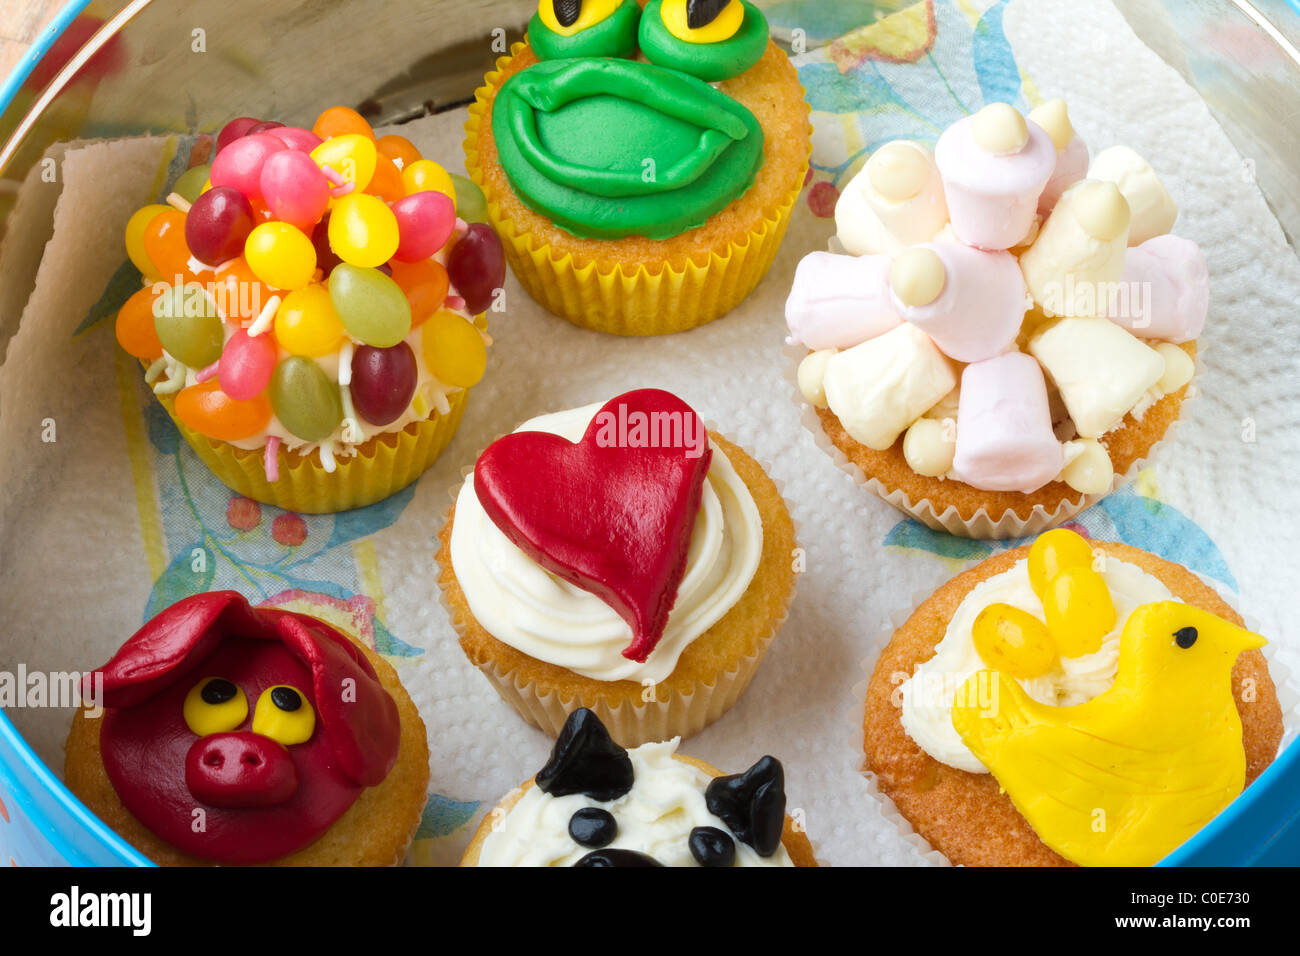 A variety of vibrant fun homemade cup cakes stored in a tin. Stock Photo